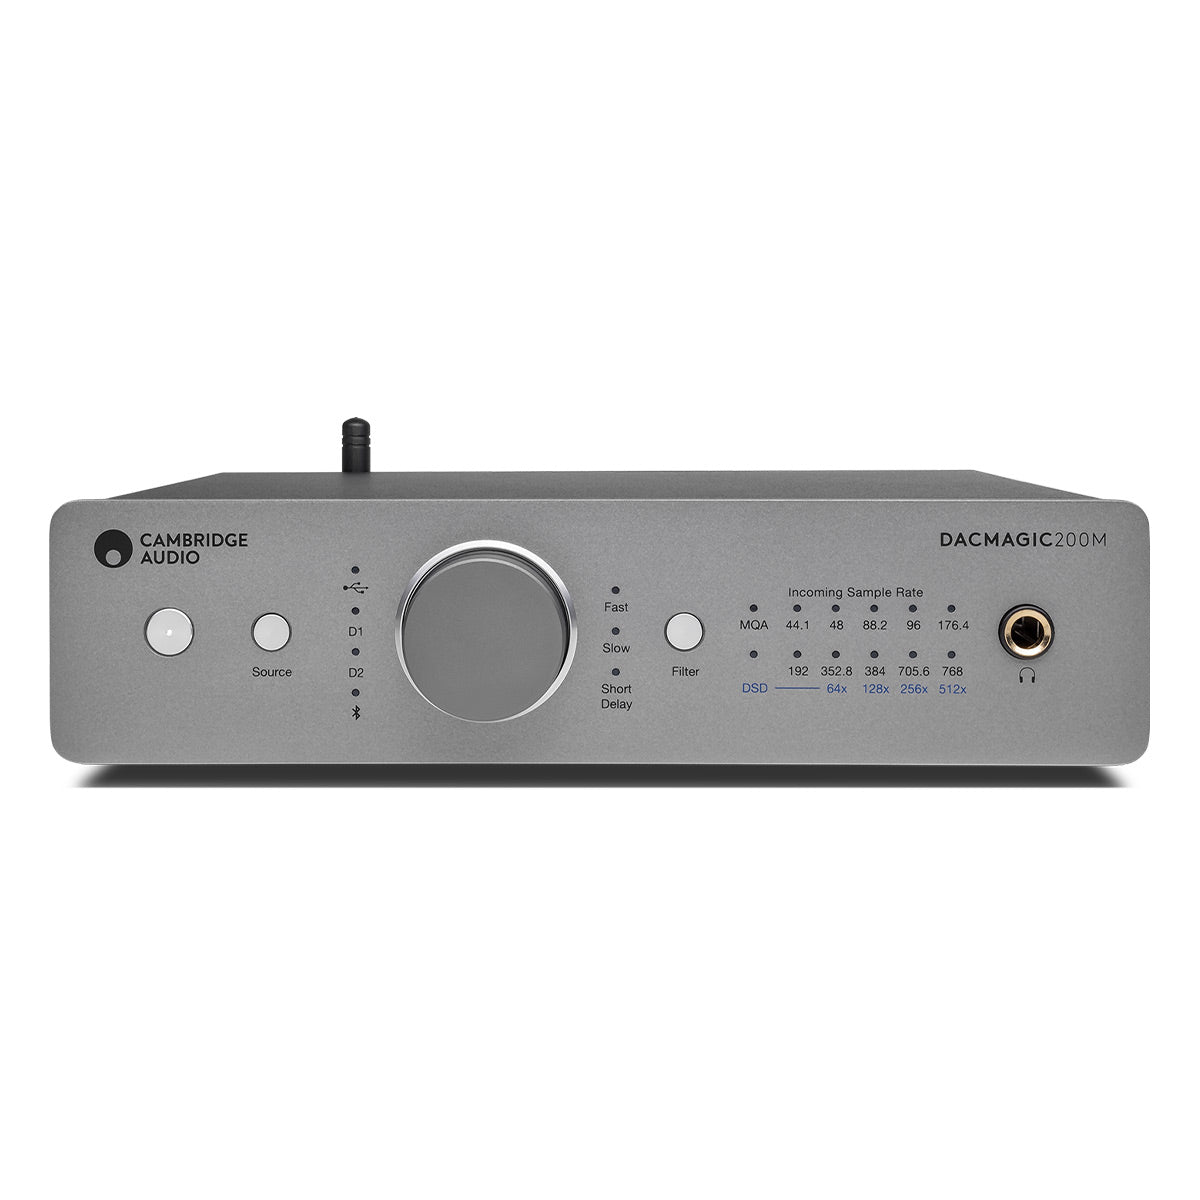 Upgrade Your Audio Experience with this 32-192KHz Hifi DAC Amp Converter!